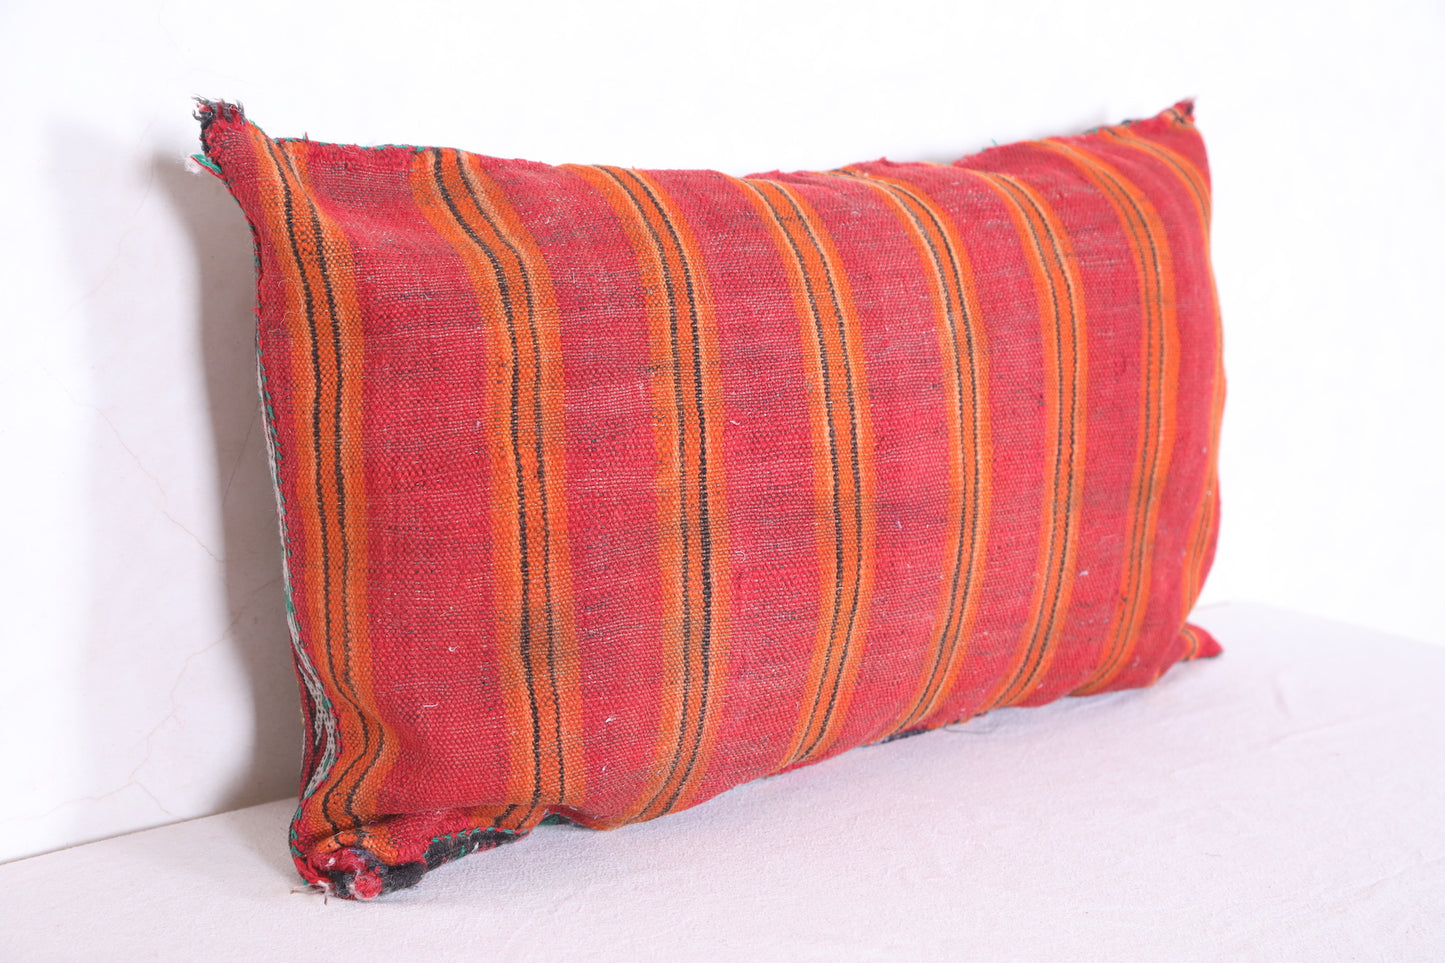 Moroccan handmade kilim pillow 15.7 INCHES X 31.1 INCHES